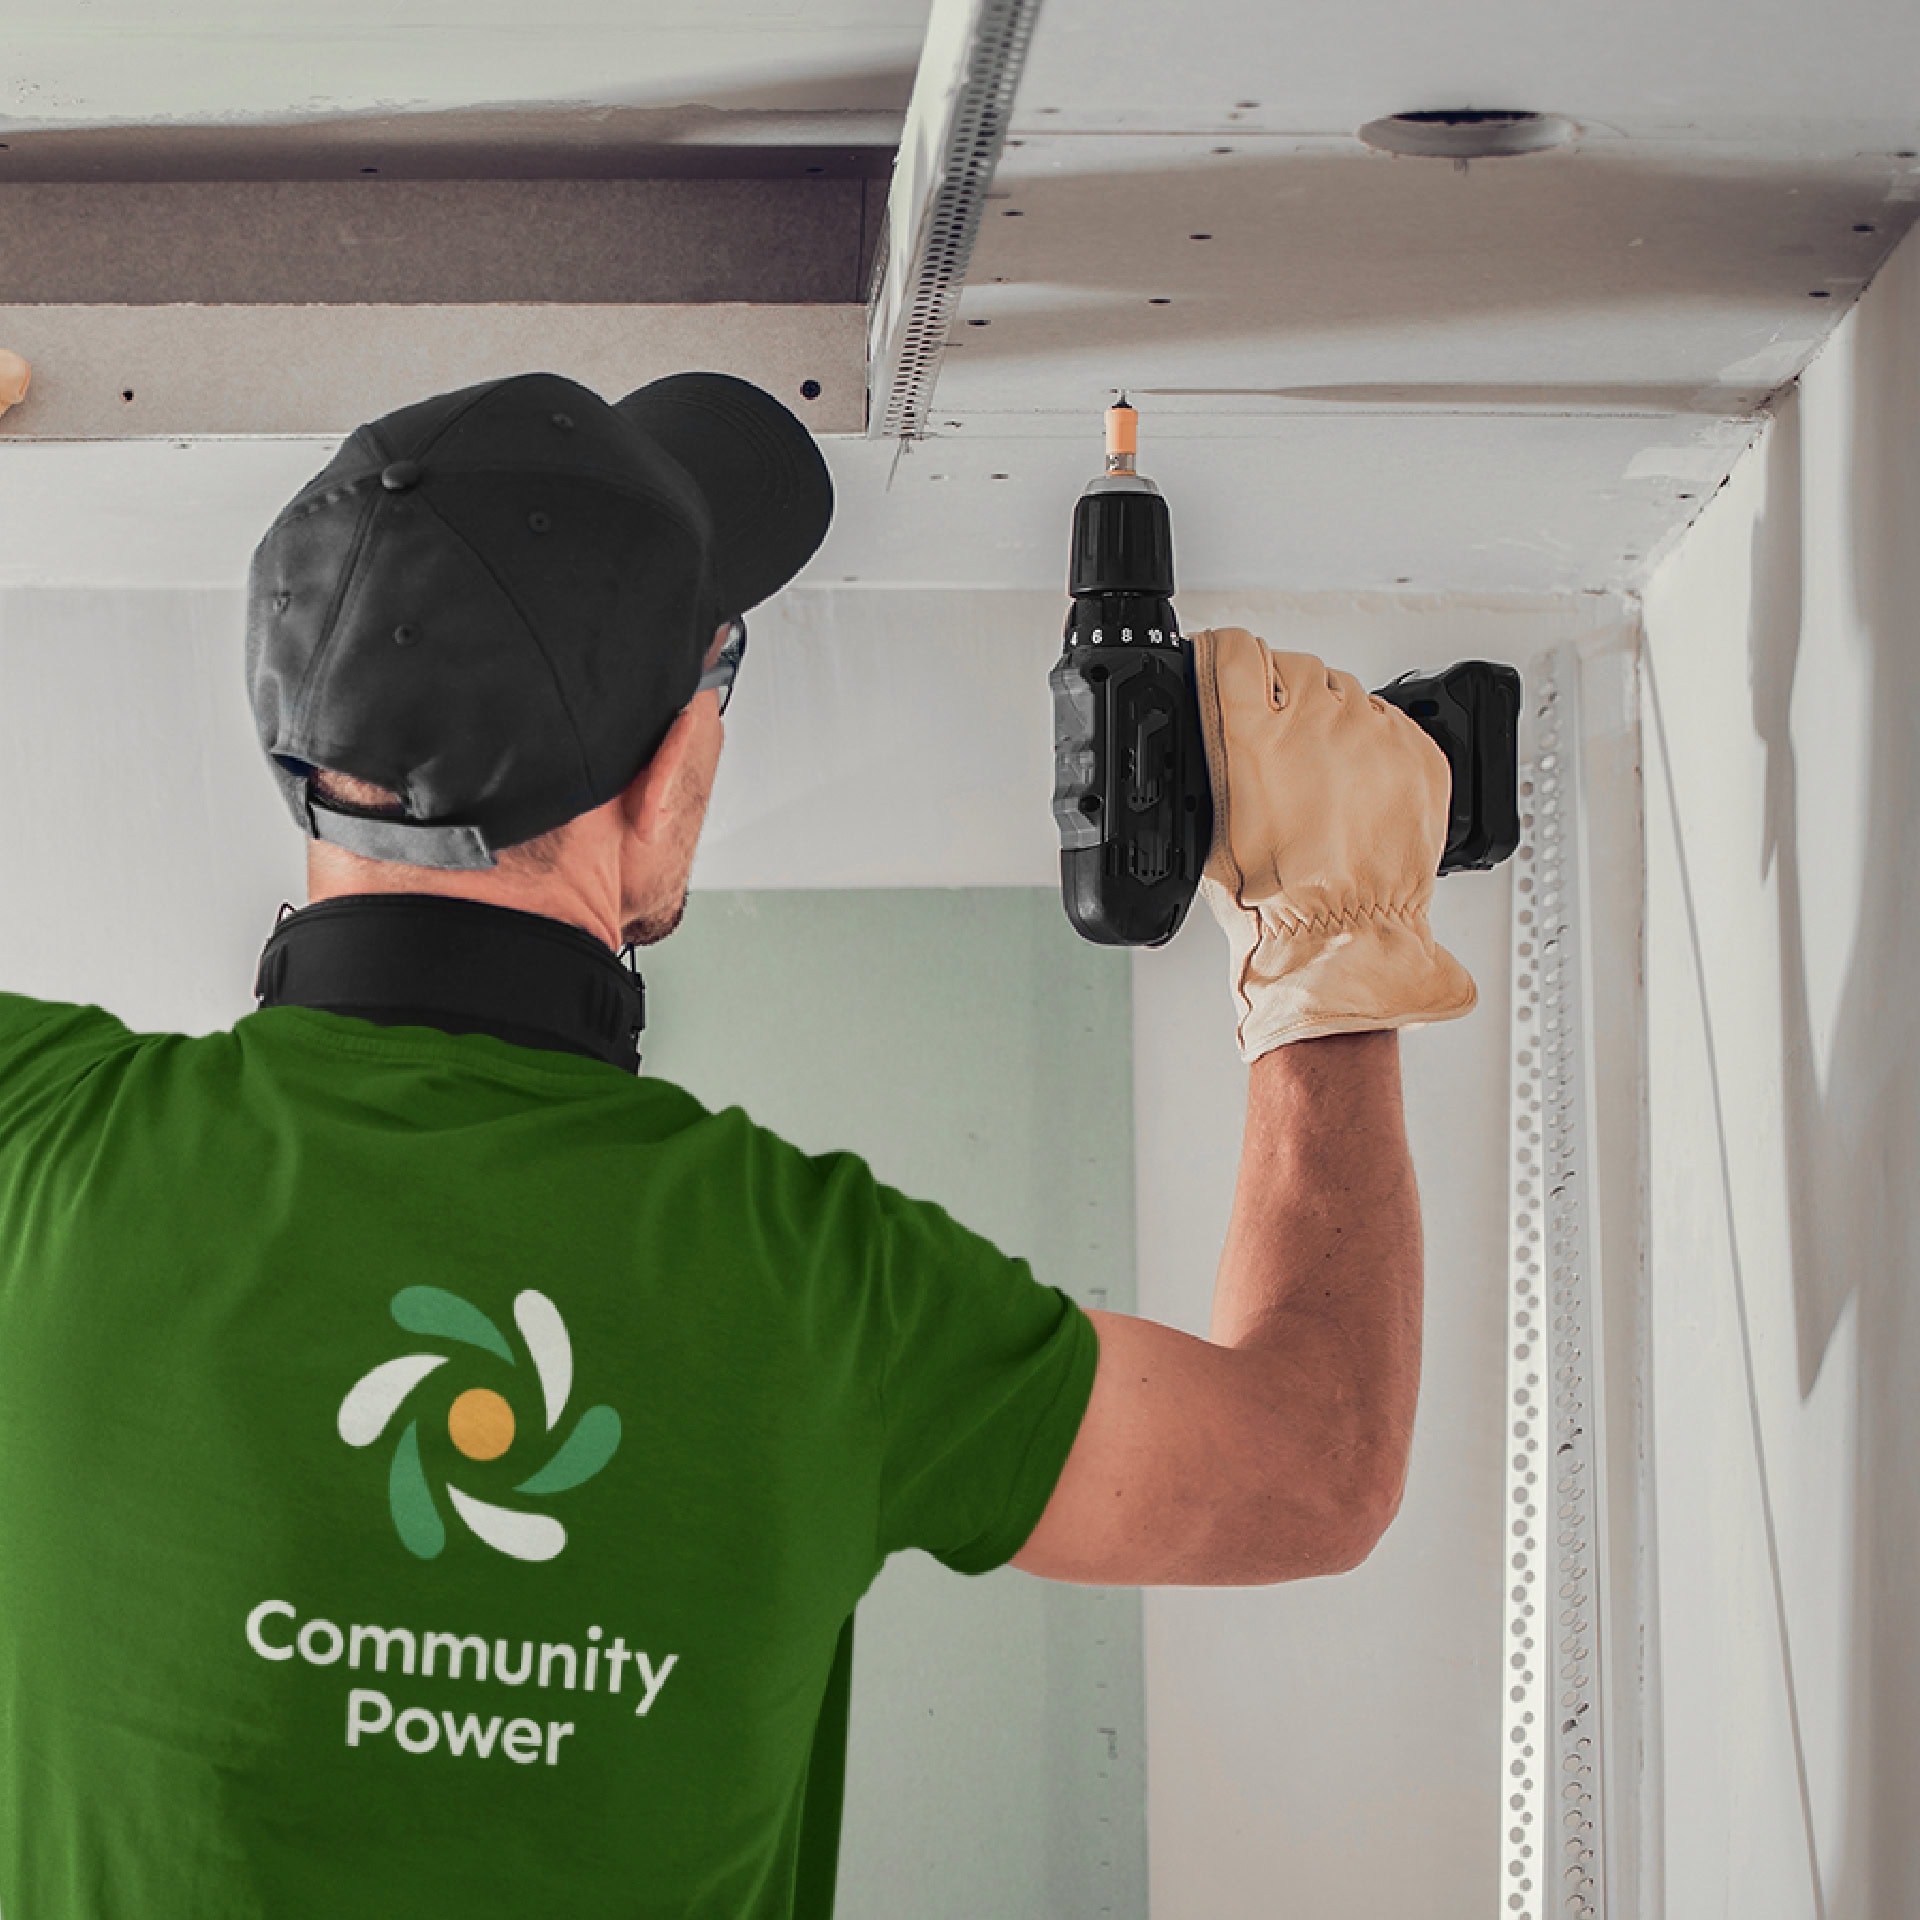 A man in a green shirt with the Kambo 'Community Power' logo on it drills into an attic wall where energy improvement work is ongoing.